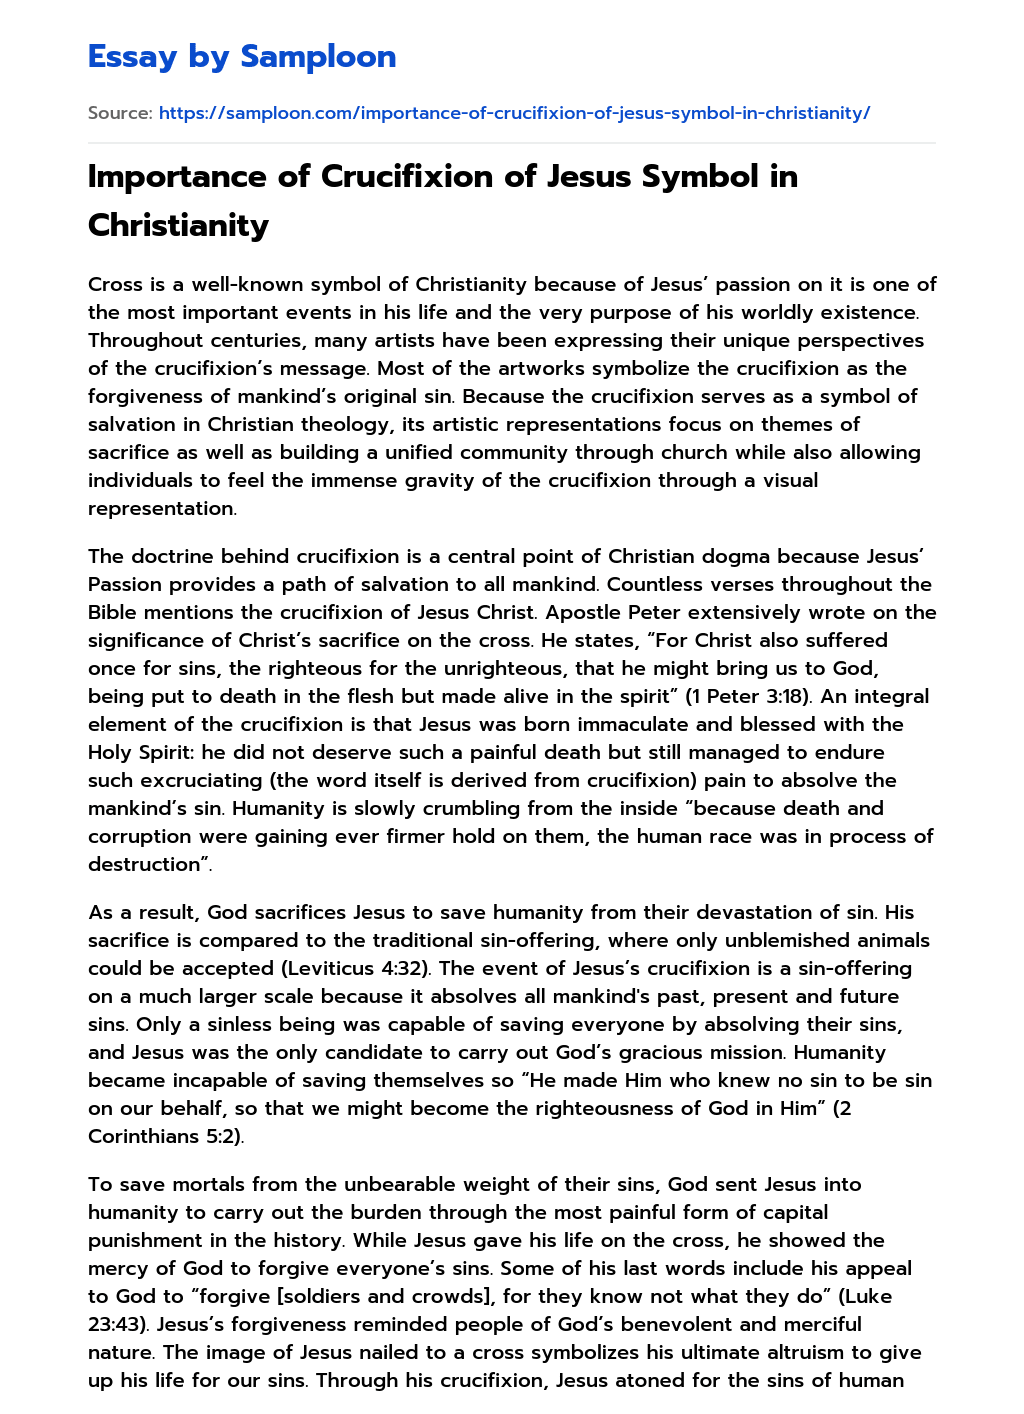 Importance of Crucifixion of Jesus Symbol in Christianity essay